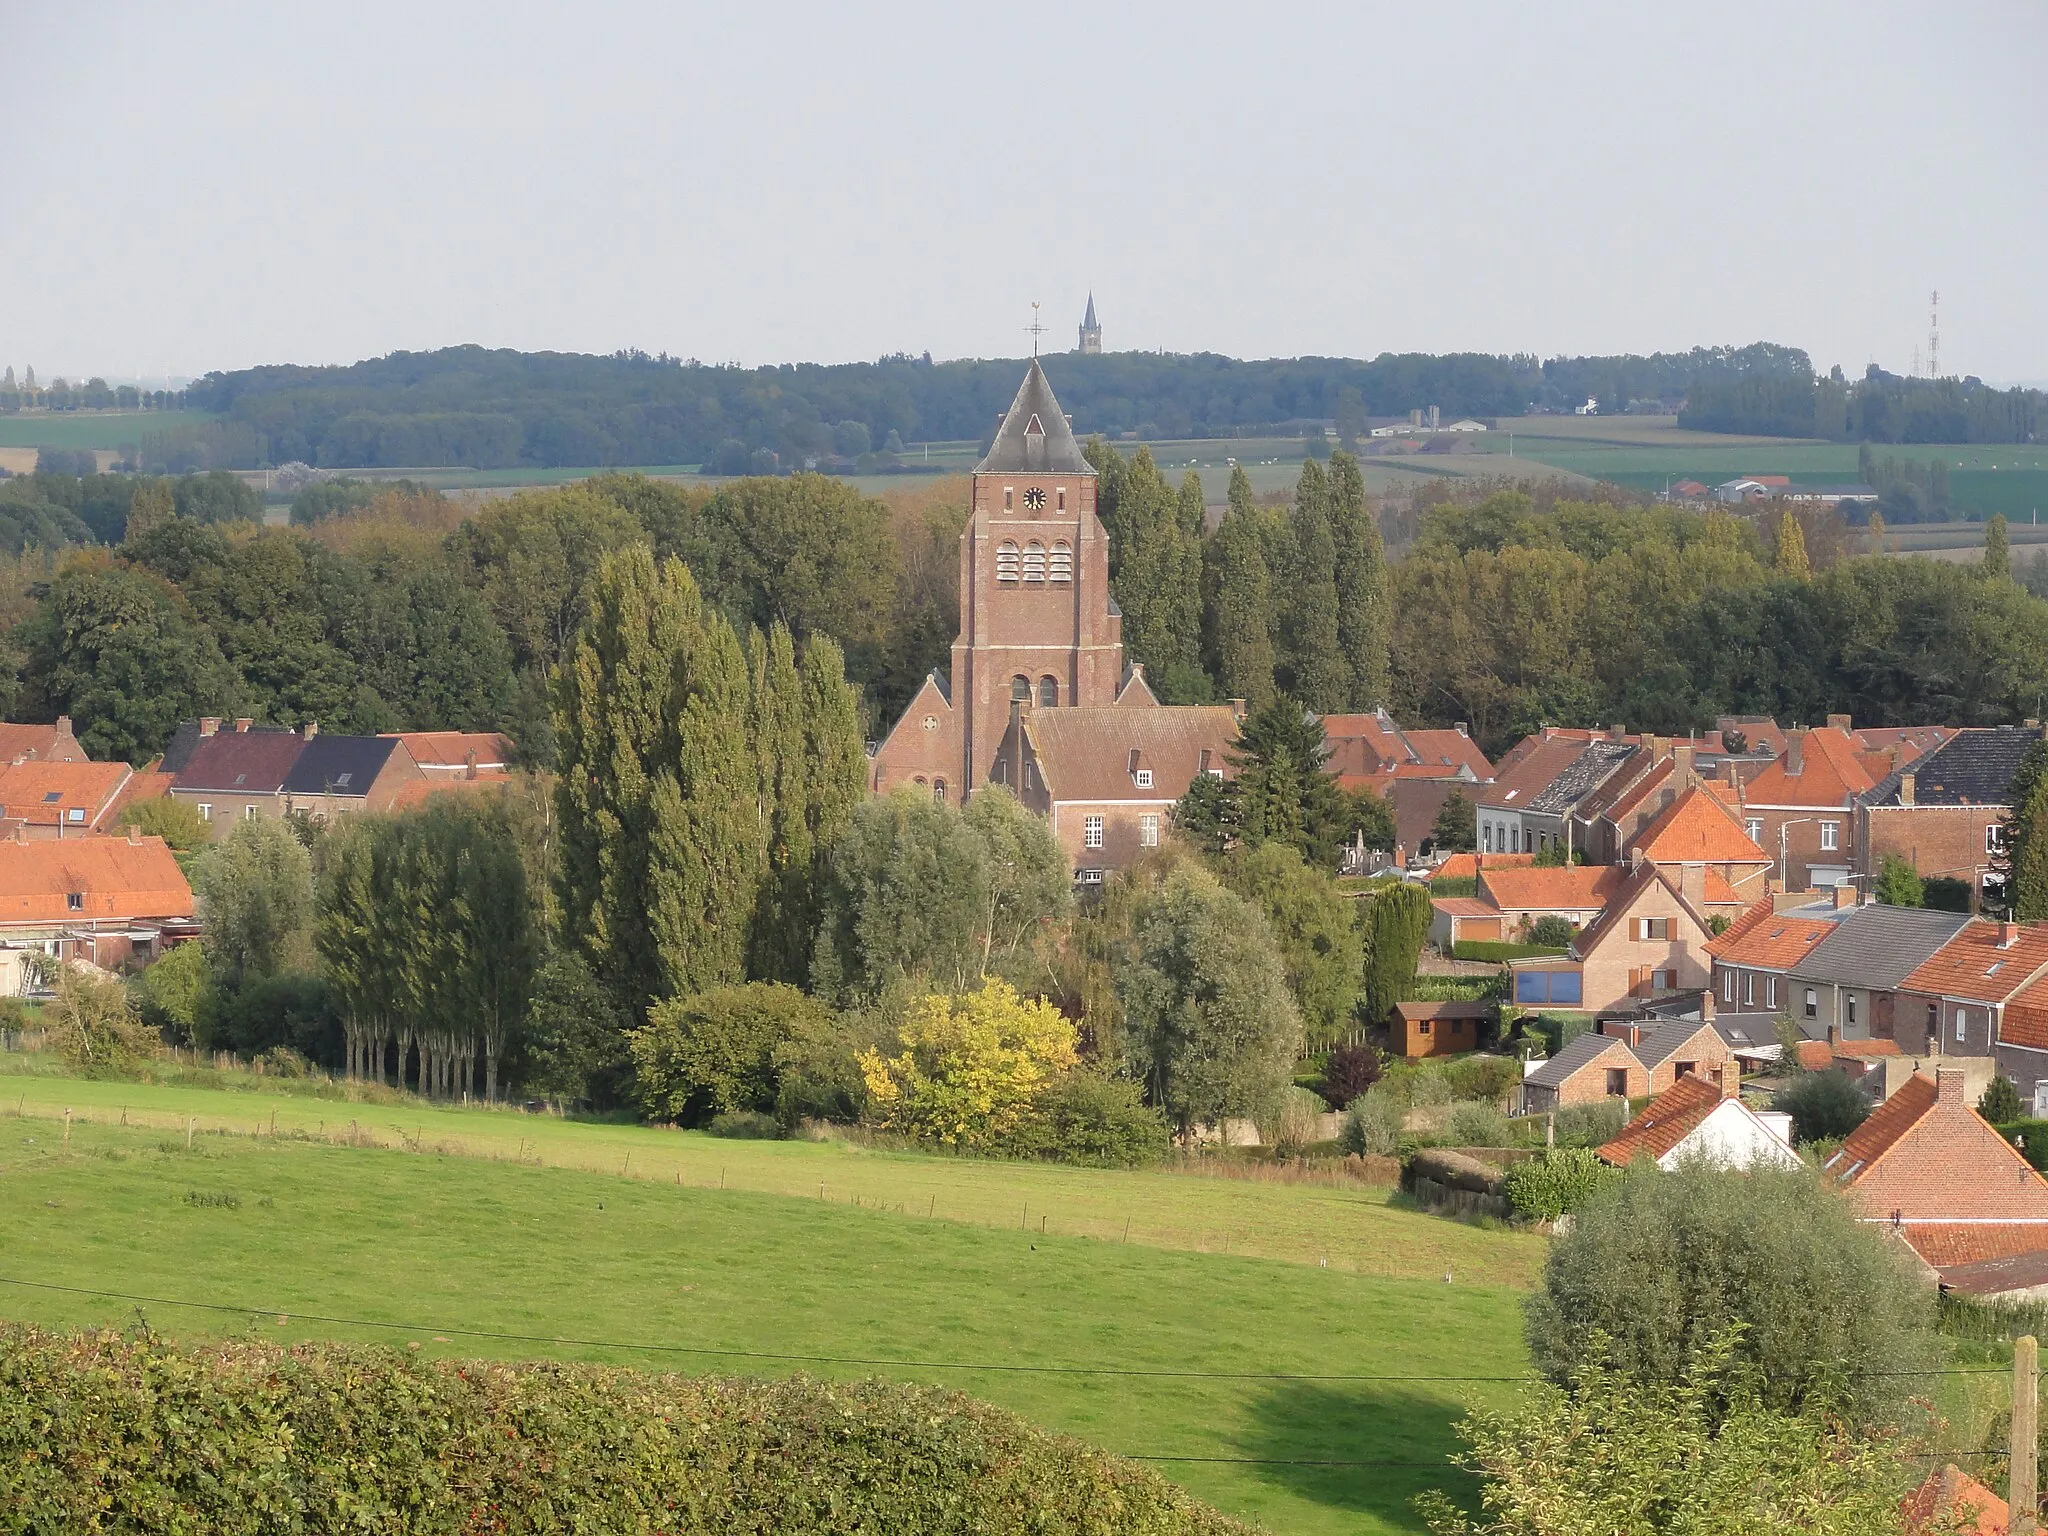 Photo showing: Village center of Kemmel, as seen from the Lettenberg. At the horizon, the church of Wijtschate can be seen. Kemmel, Heuvelland, West Flanders, Belgium.